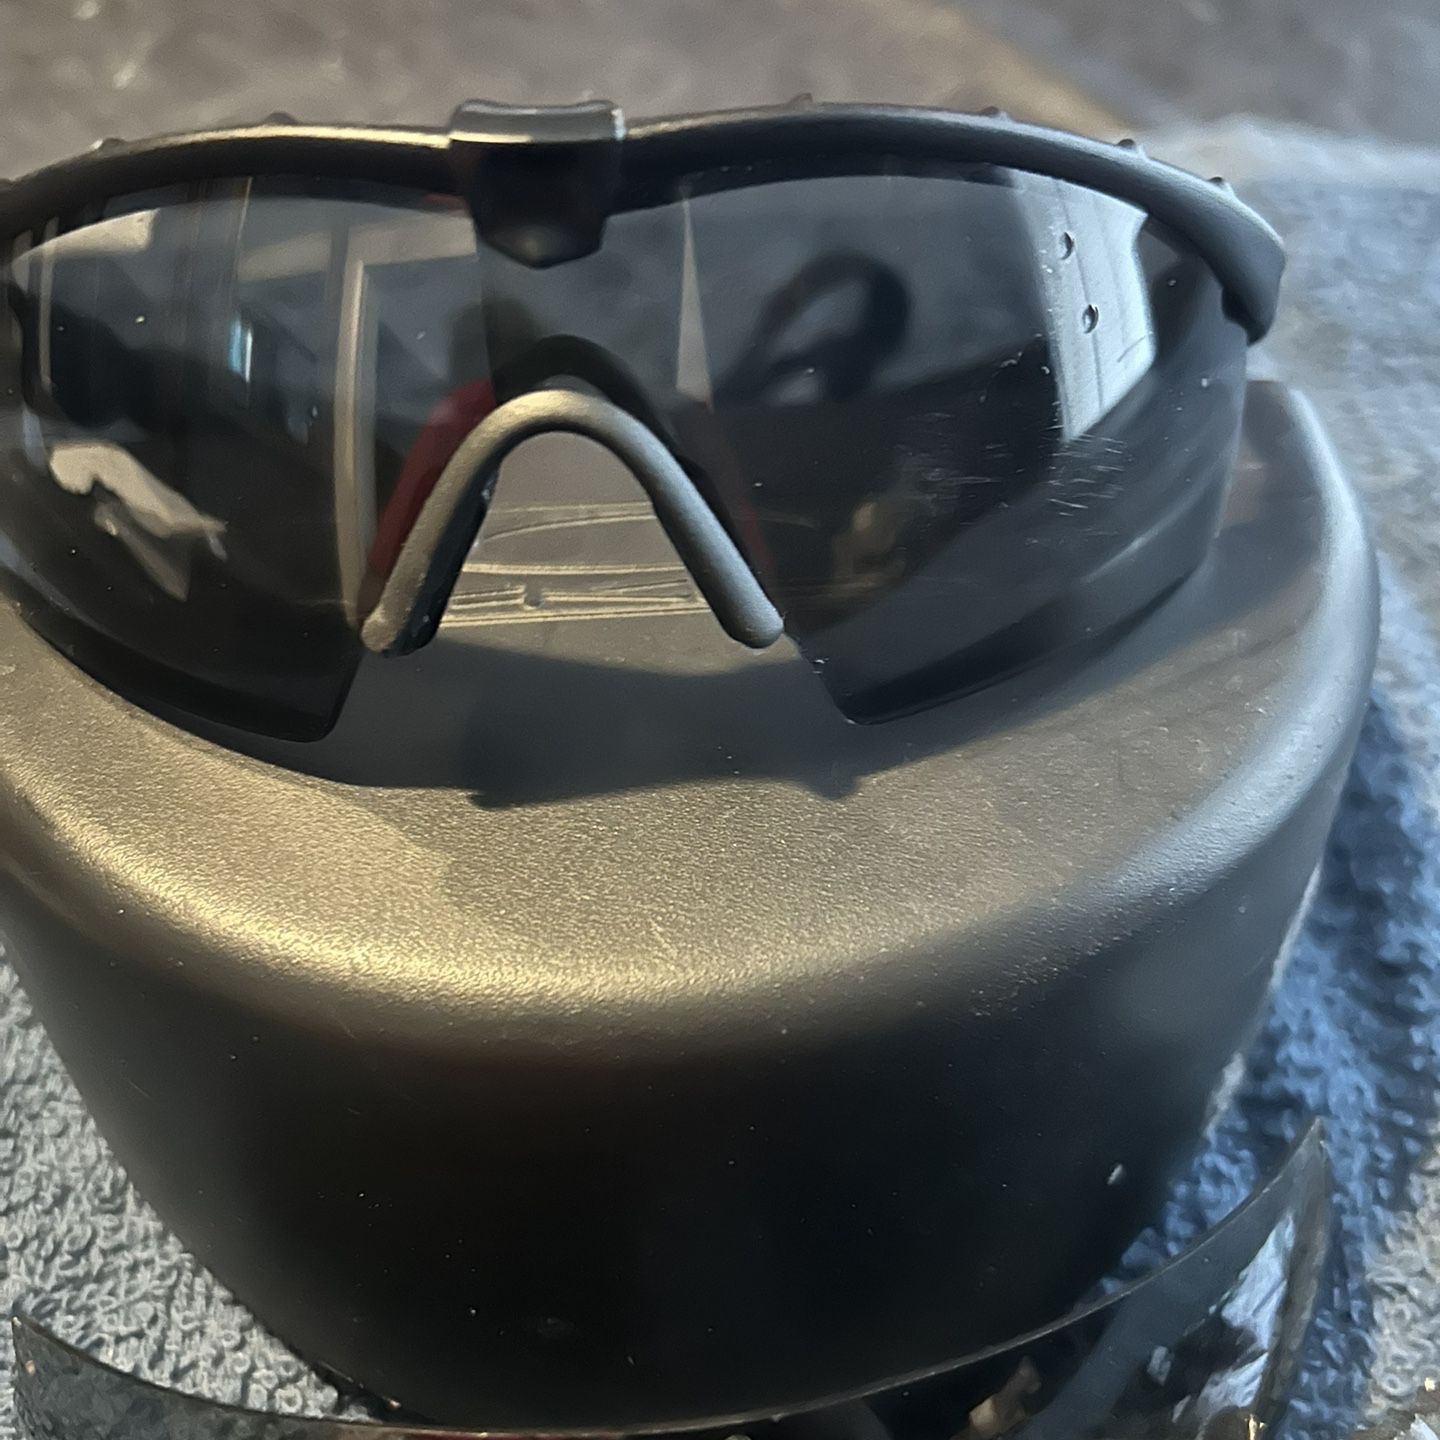 Oakley Safety Sunglasses for Sale in Tampa, FL - OfferUp